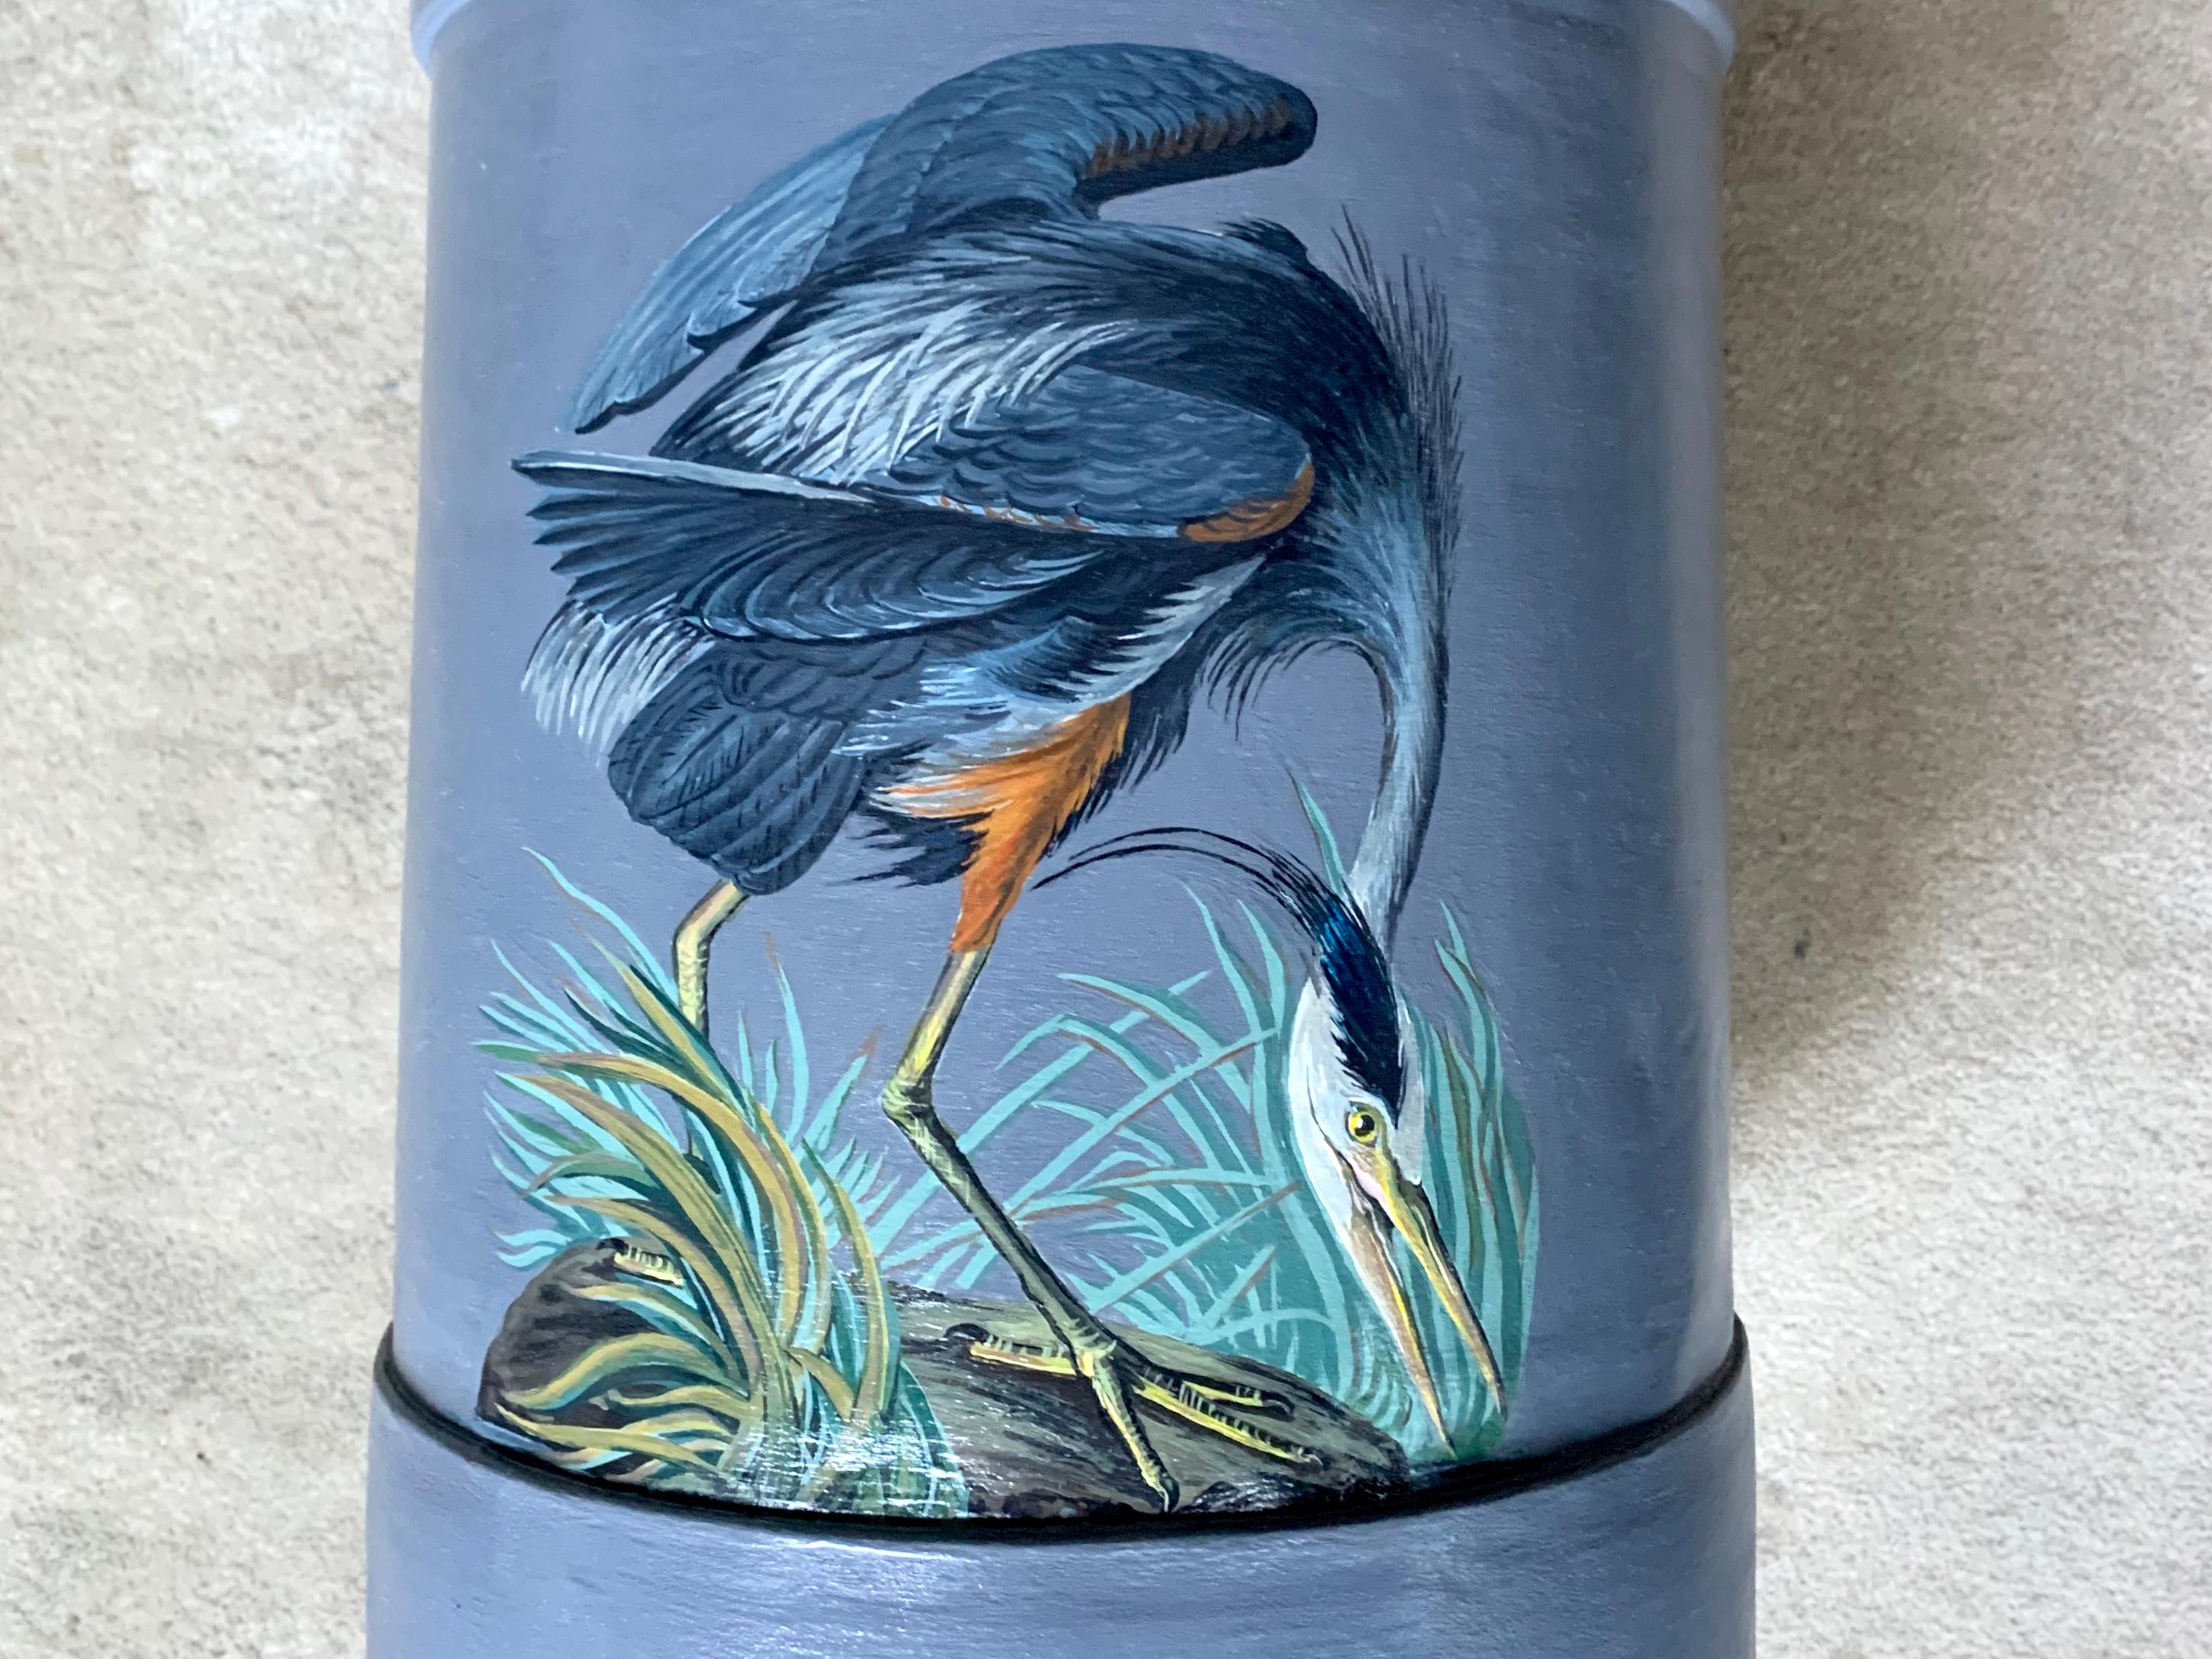 Great blue heron umbrella stand. Vintage American farm house milk can painted in blue grey with Audubon great blue heron. United States, early 20th century.
Dimensions: 9.5